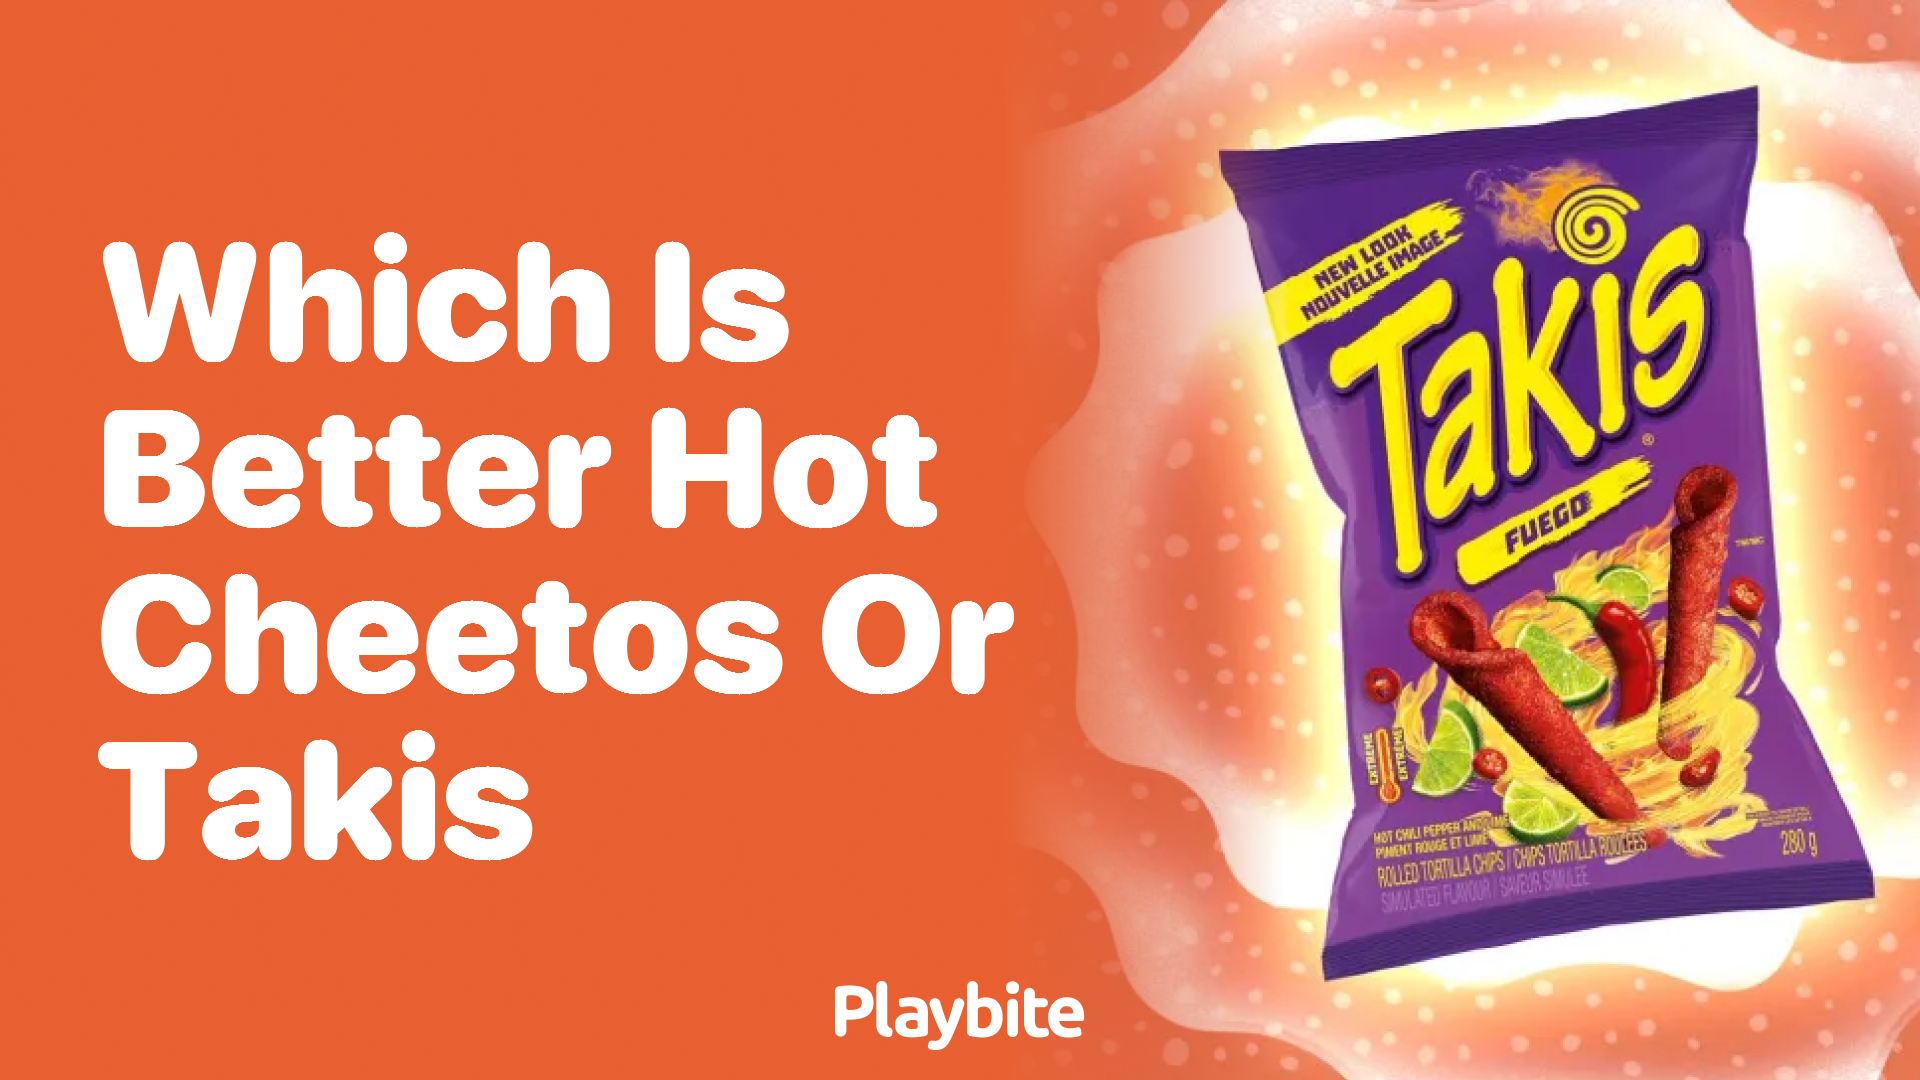 Which Is Better: Hot Cheetos or Takis?